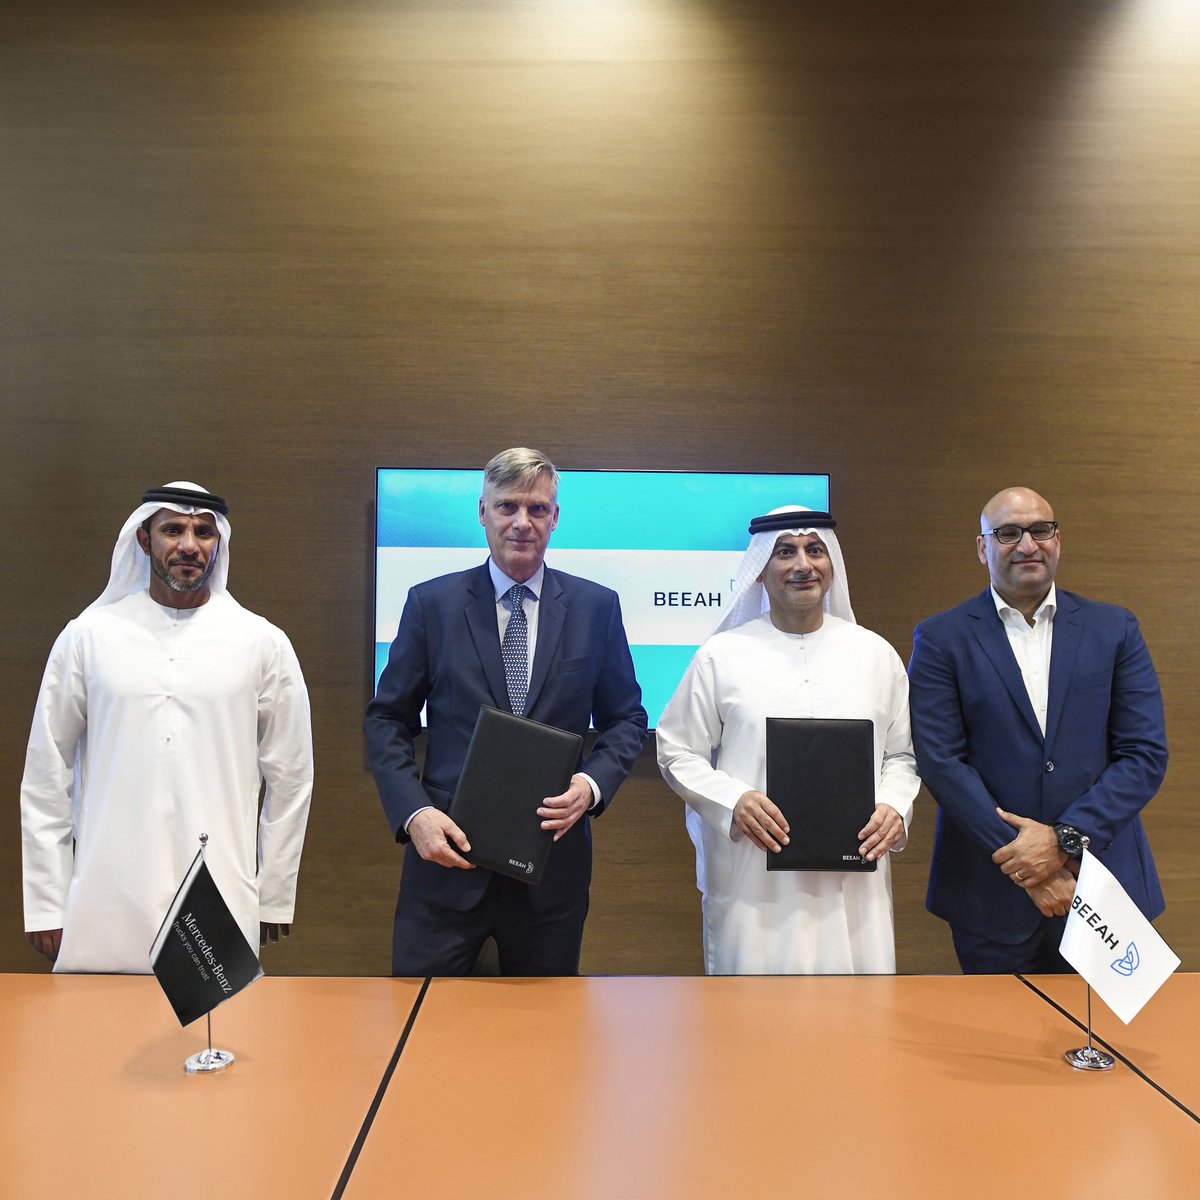 BEEAH has signed a MoU with Daimler Commercial Vehicles MENA (DCV MENA) to promote sustainable transportation in the region. DCV MENA will work with BEEAH to enhance #fleetoperations for its #wastecollection services, prioritize the safety of drivers and the community.